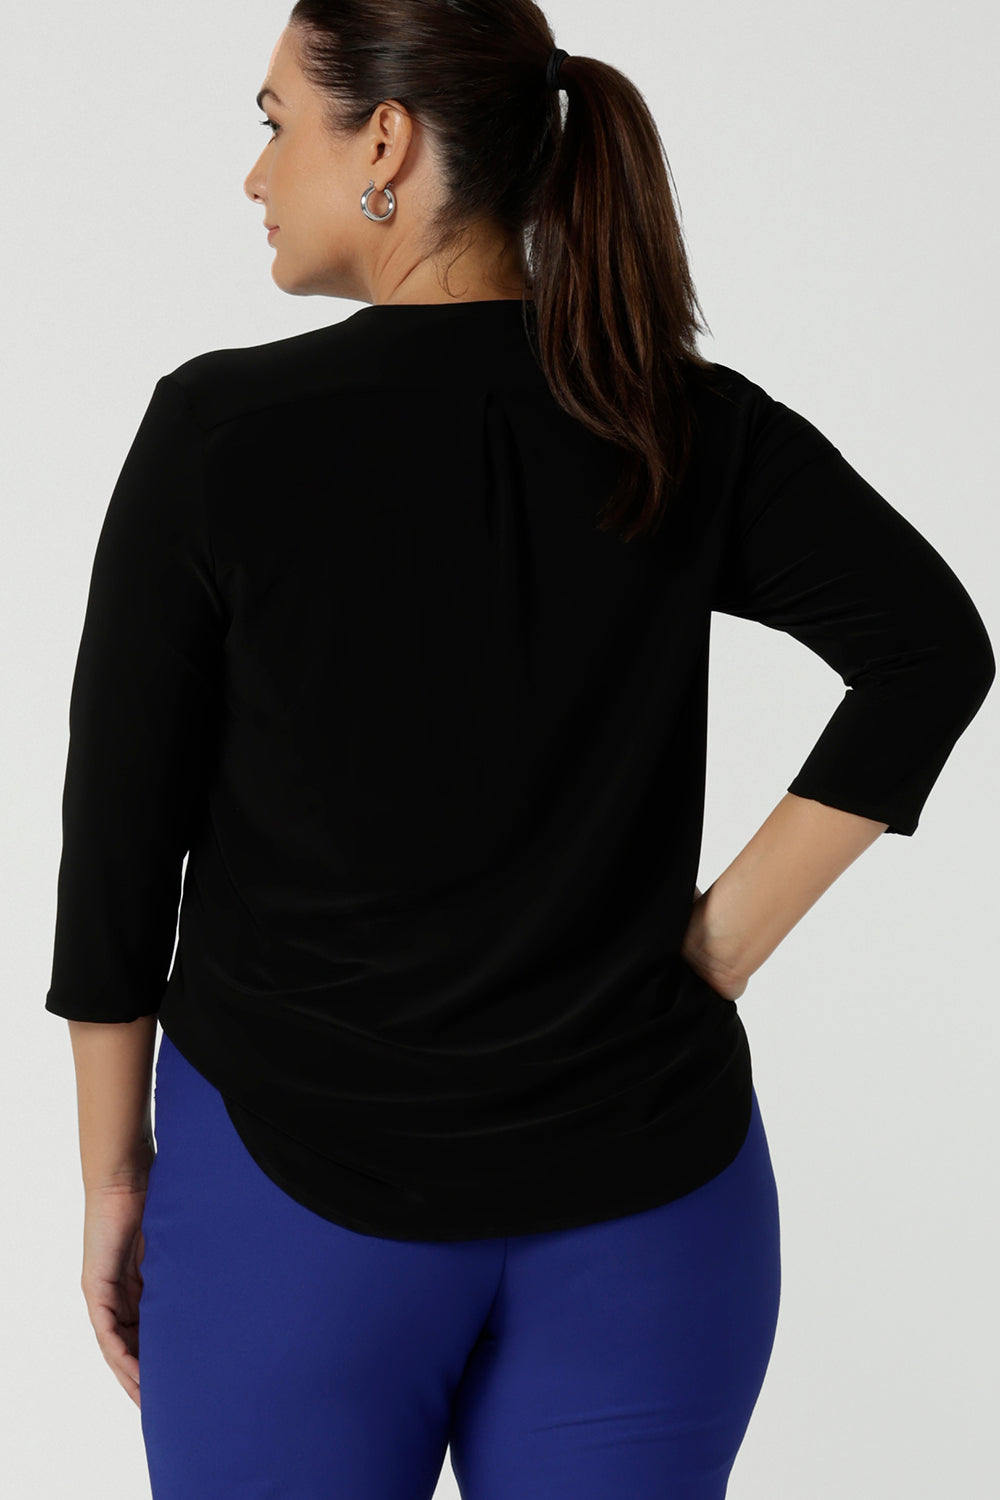 Back view of a size 12 woman wears comfortable corporate work top in black jersey. The Jaime top is Australian made with a tailored pleat front neckline, v-neckline and 3/4 sleeve. Sizes 8 - 24